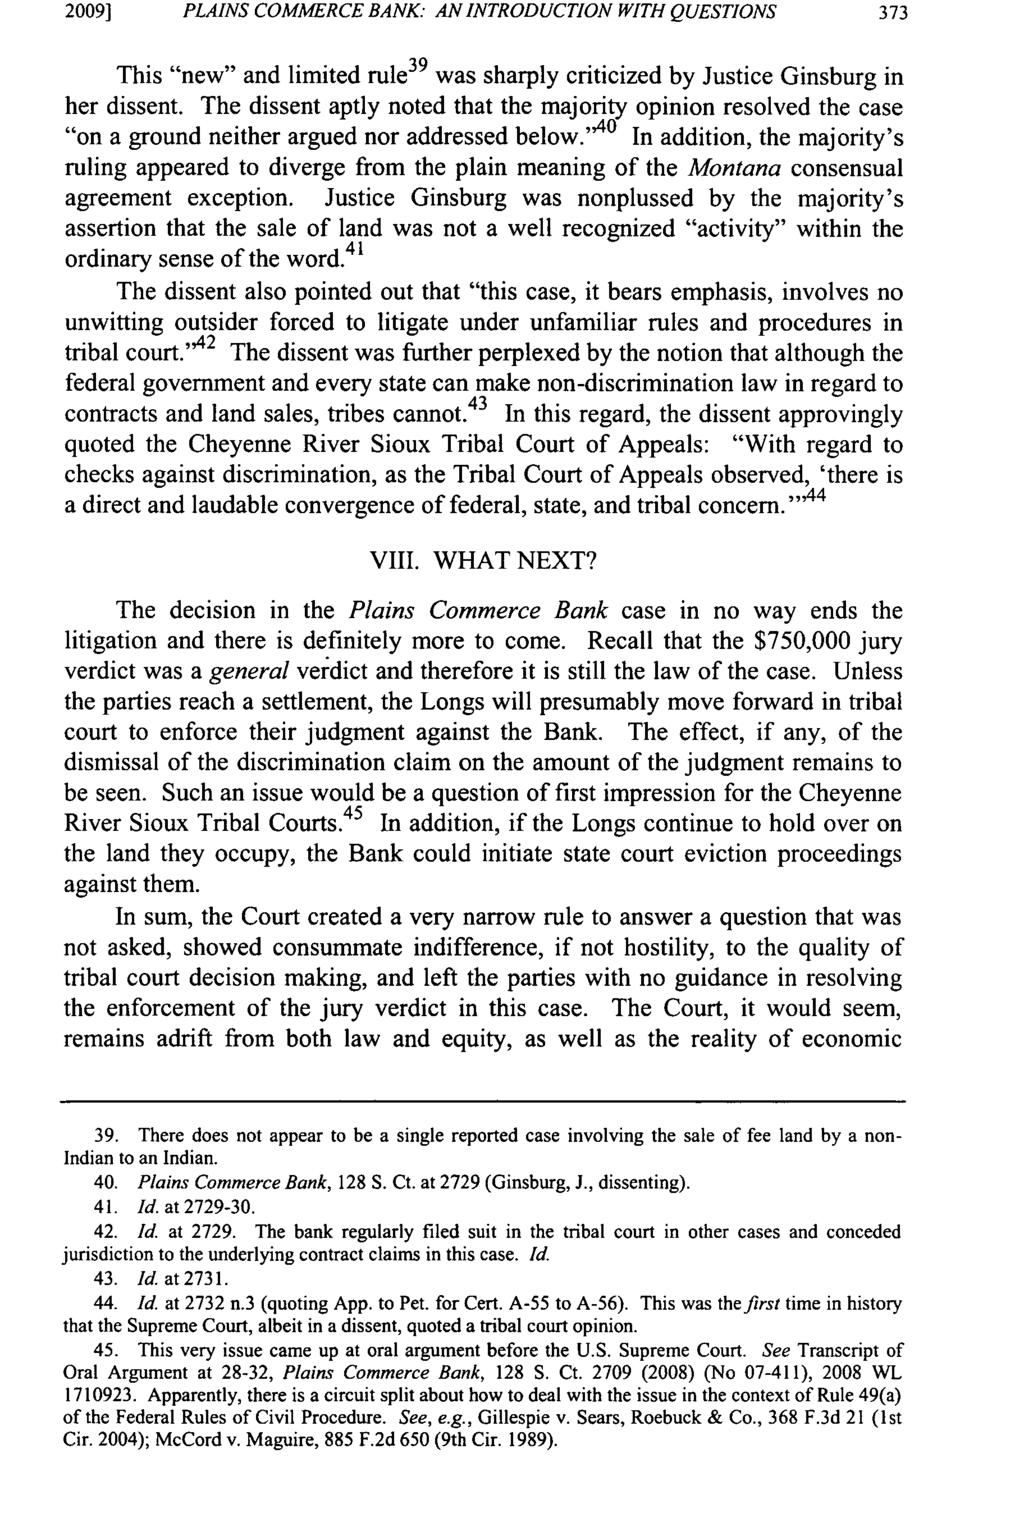 2009] PLAINS COMMERCE BANK AN INTRODUCTION WITH QUESTIONS This "new" and limited rule 39 was sharply criticized by Justice Ginsburg in her dissent.